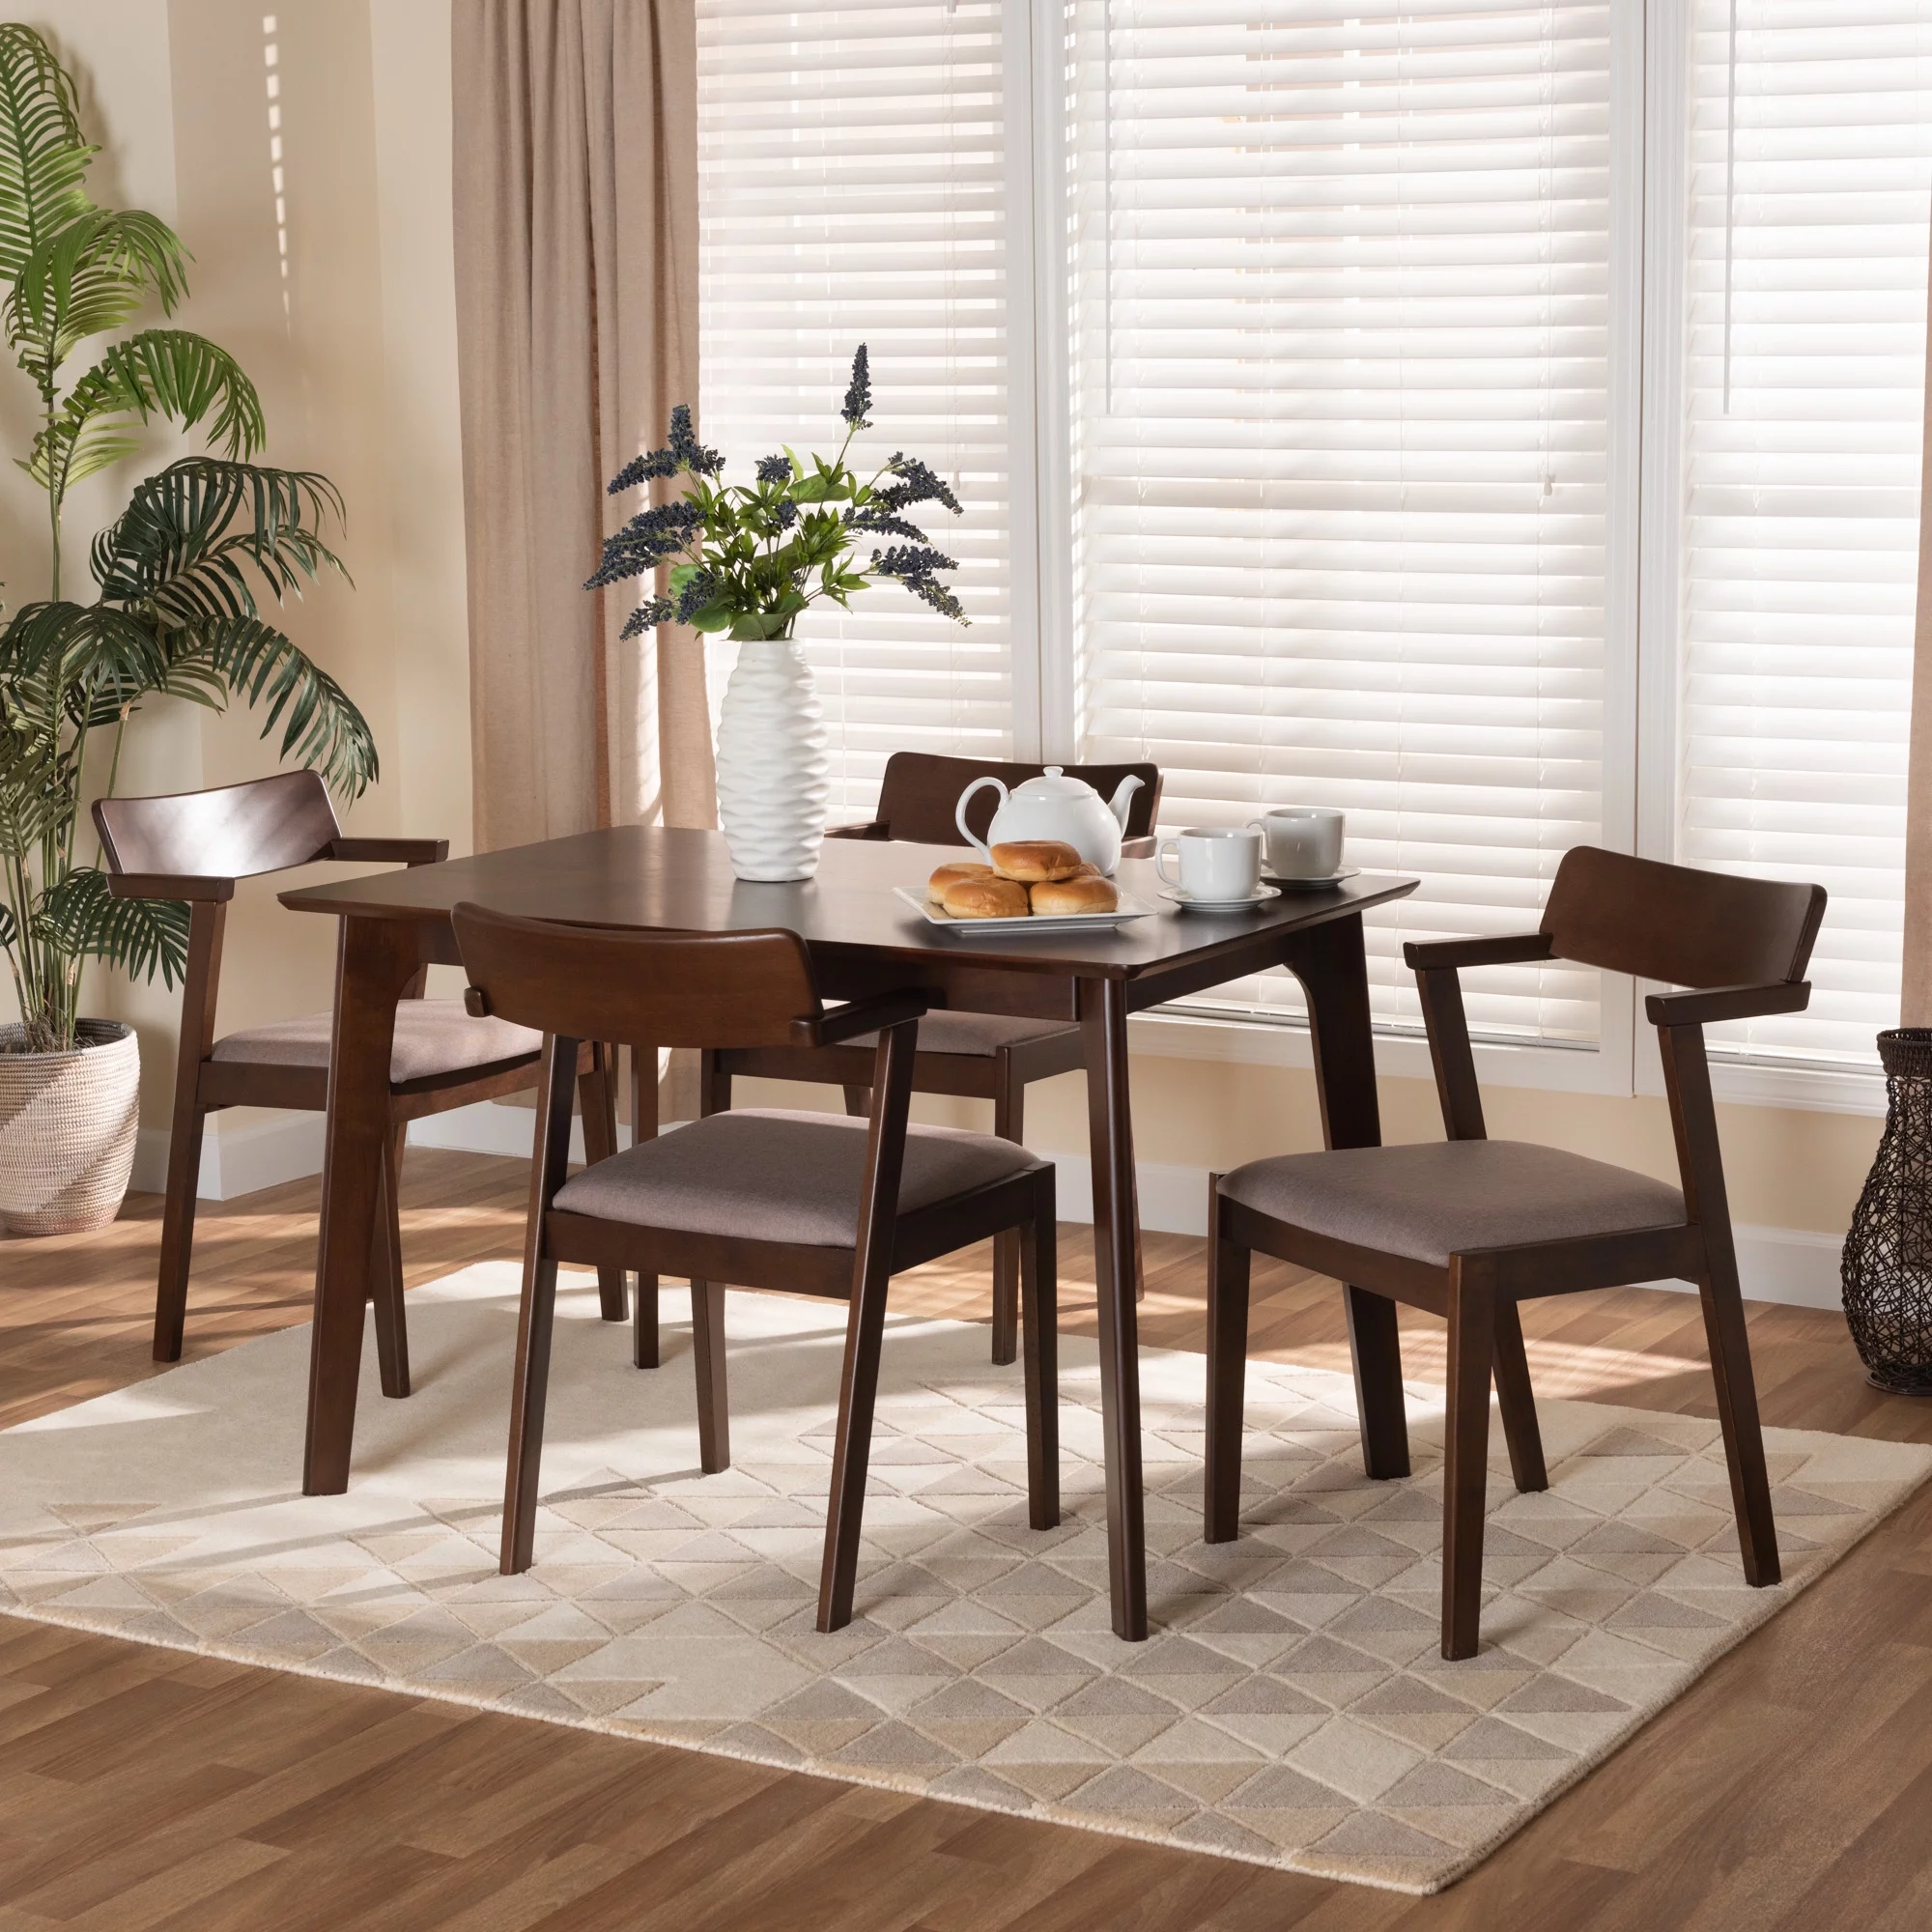 Baxton™ - Berenice Mid-Century Modern 5-Piece Dining Set - it's about the style and comfort of chairs and tables that will last a long time, thanks to their quality